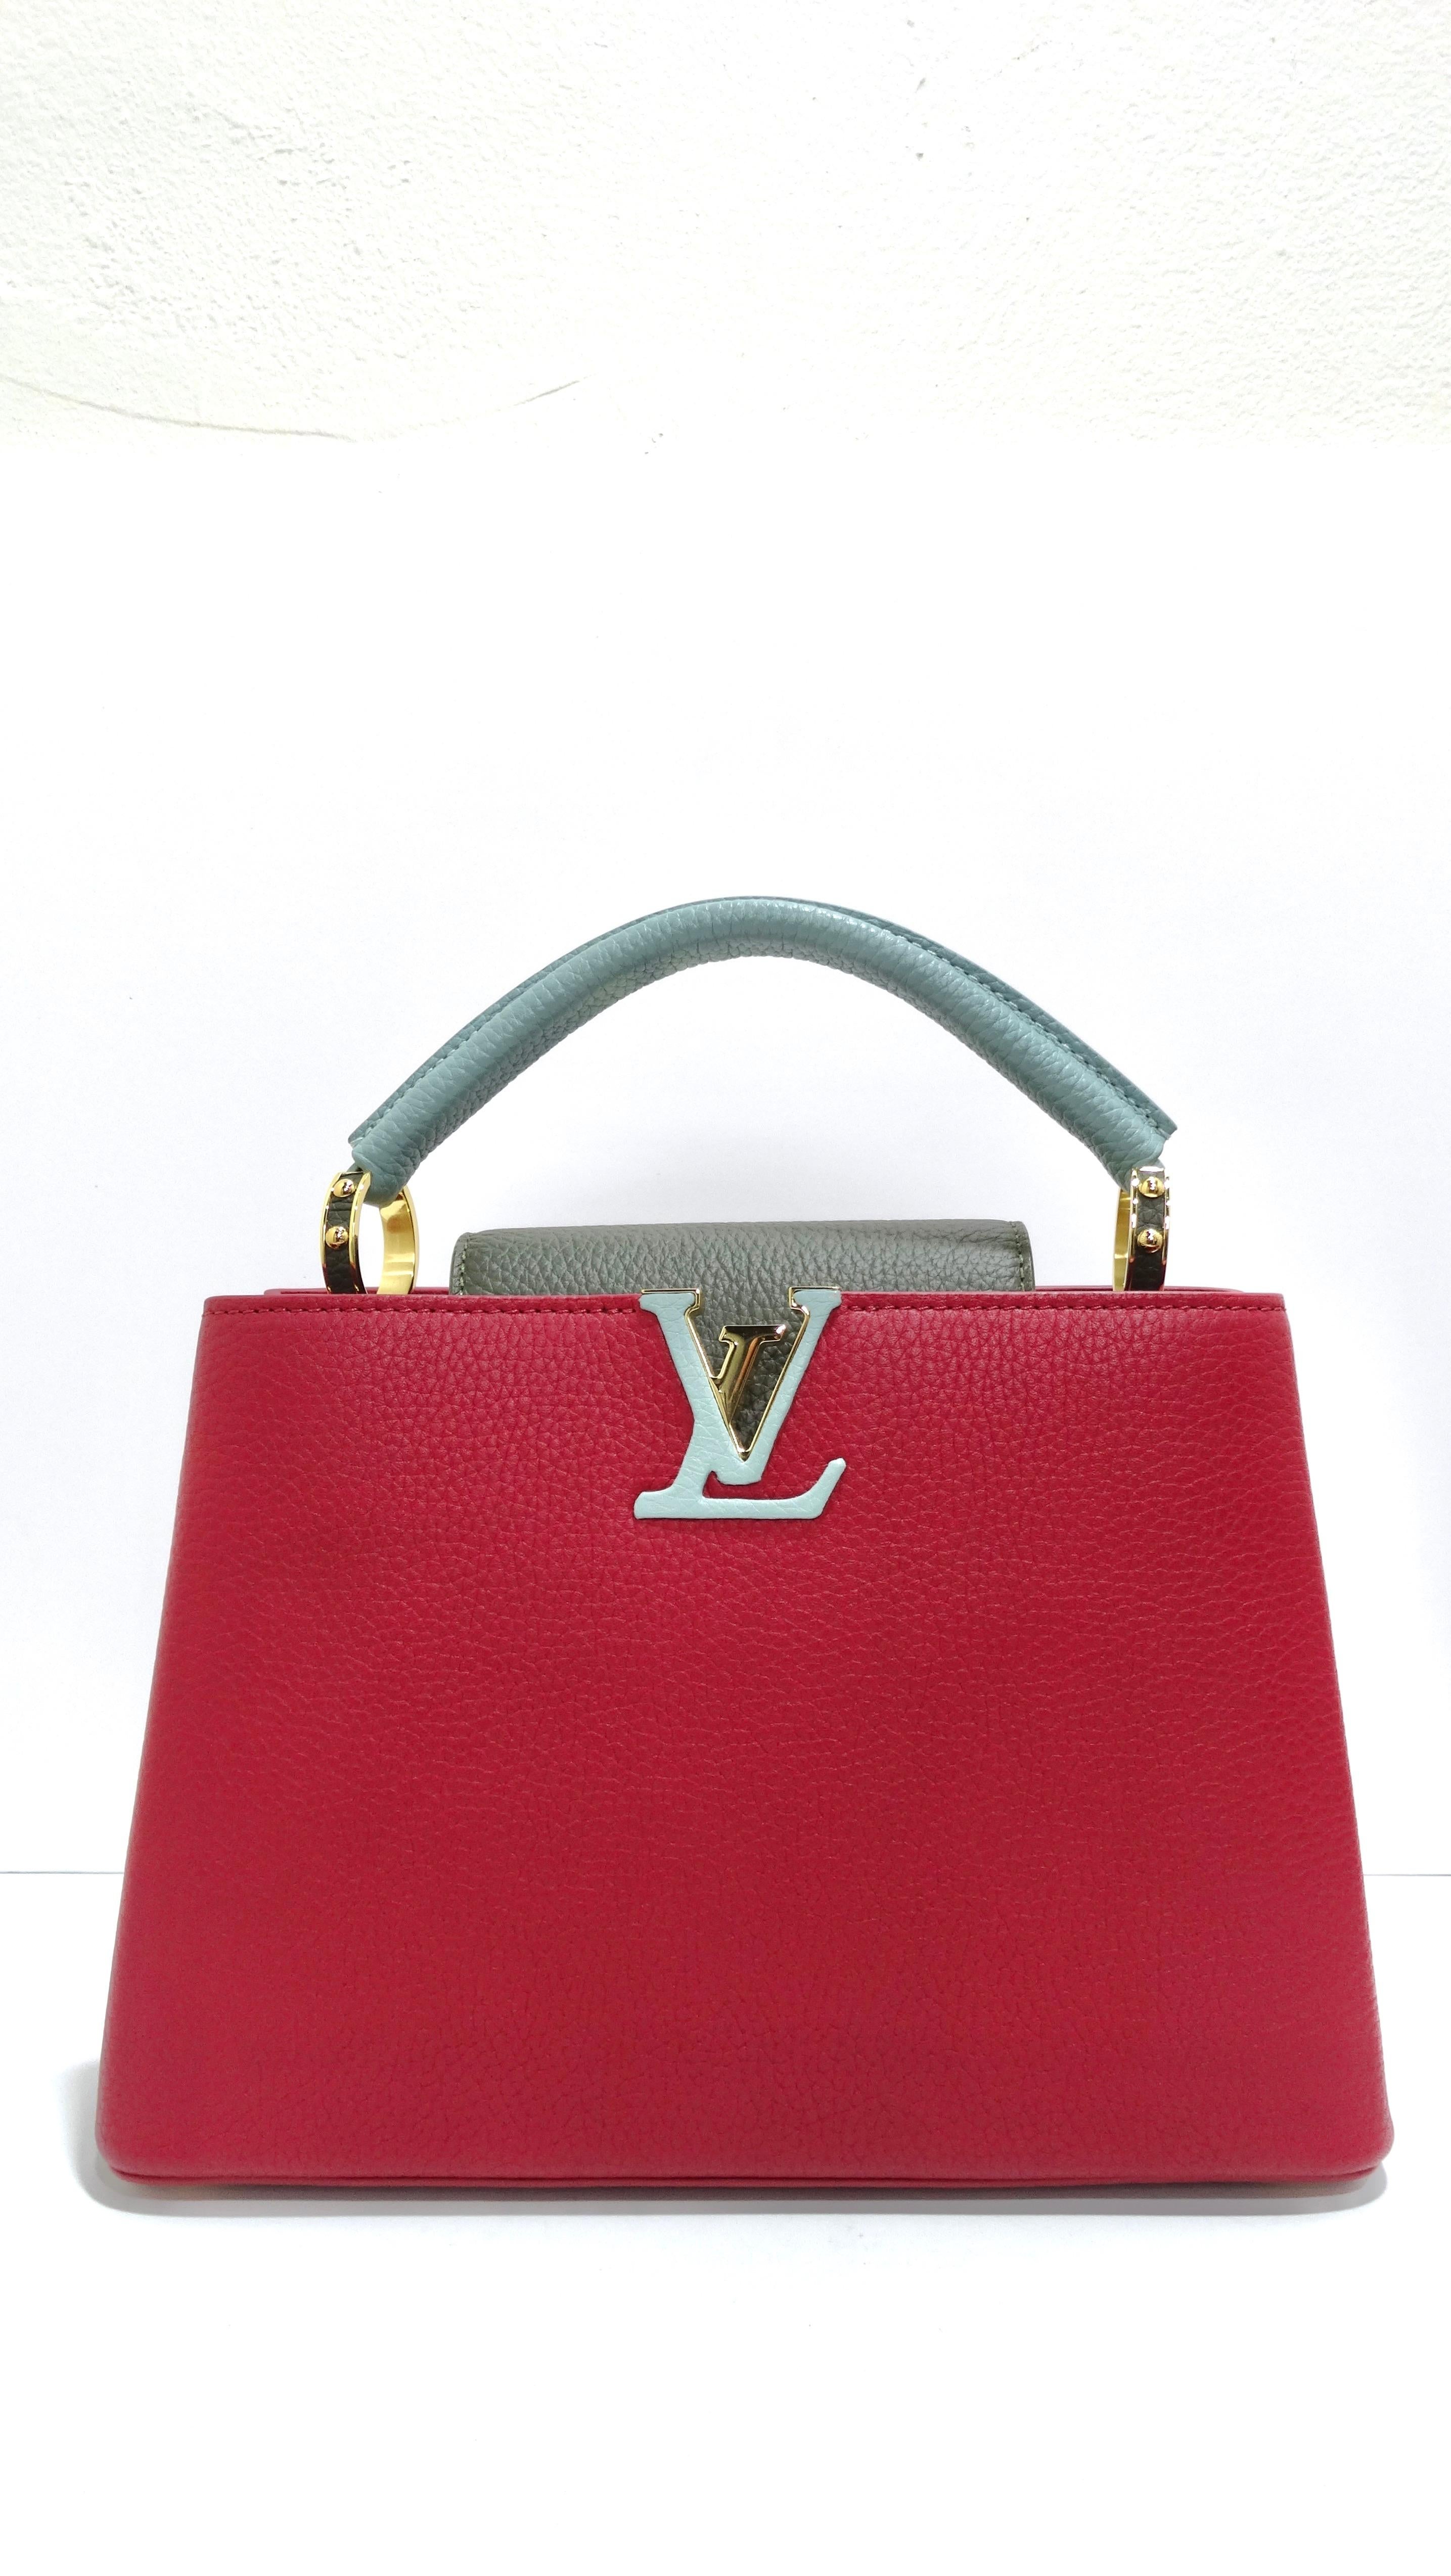 Add a pop of color to any outfit! This beautiful bag is composed of luxurious textured calfskin leather in a deep berry burgundy pink accompanied by mint and grey. The handbag features a single rolled leather reinforced top handle with stylized gold